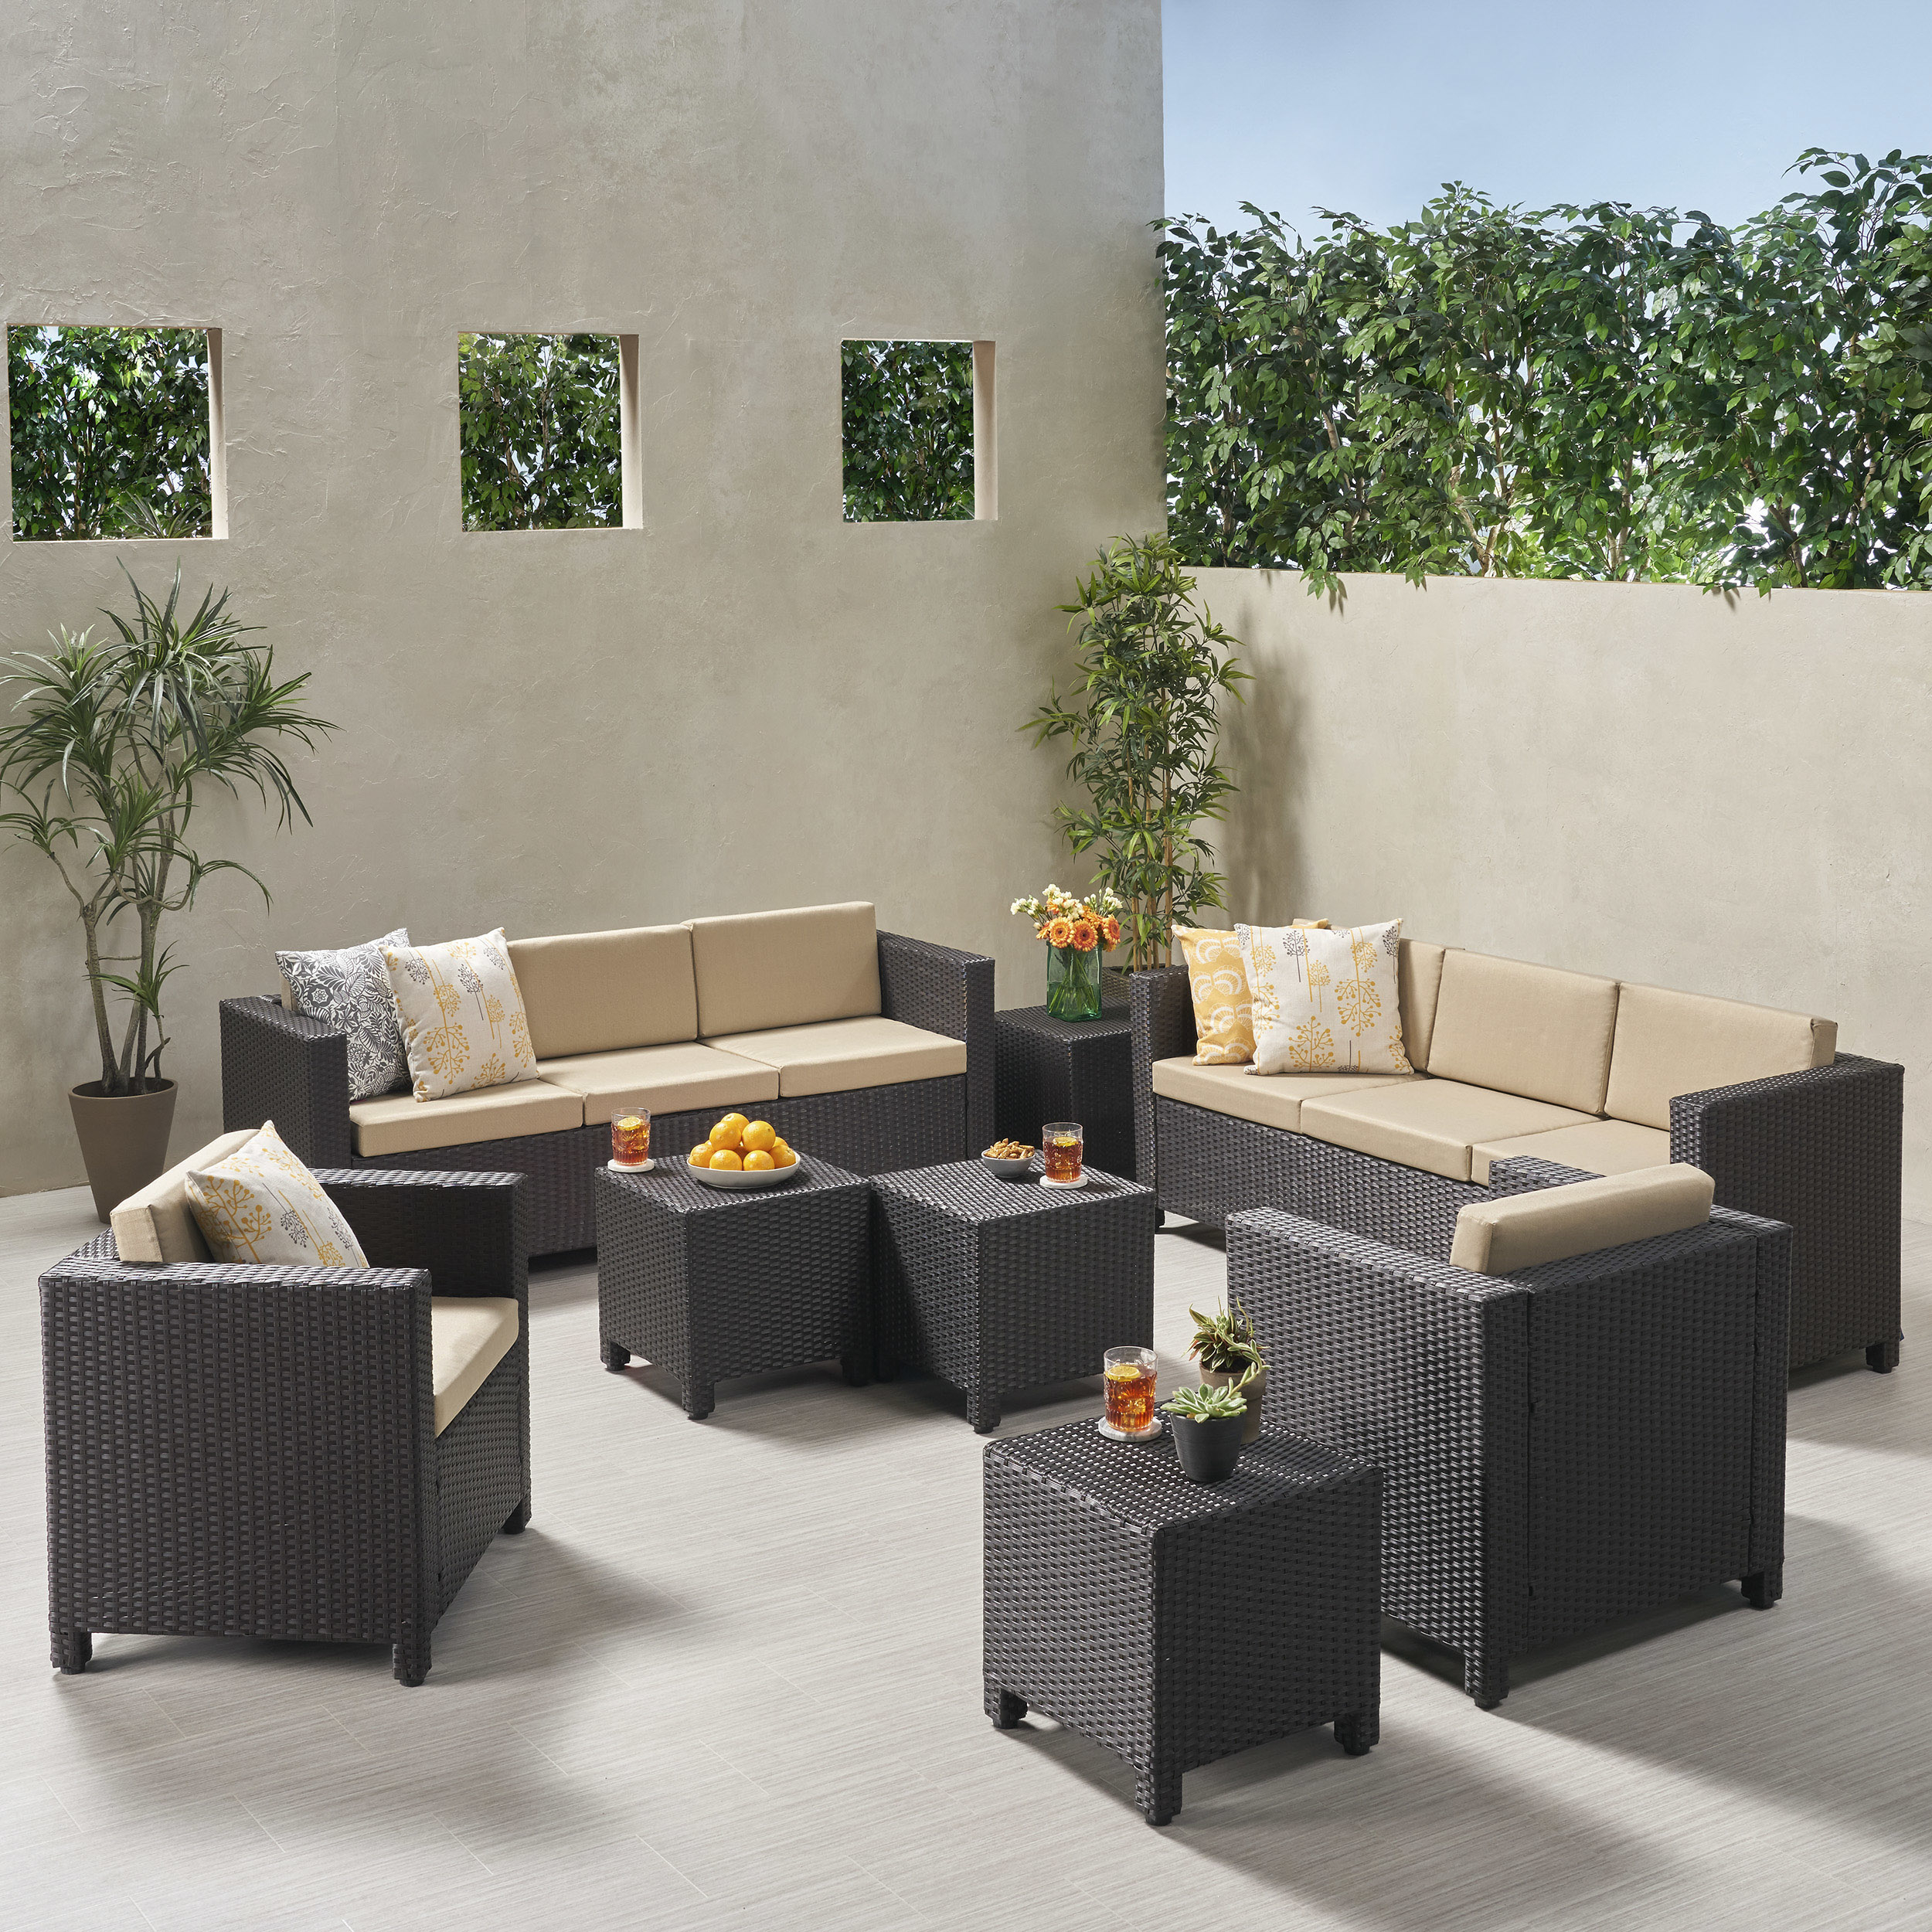 Emily Outdoor 8 Seater Wicker Chat Set with Side Tables - dark brown + beige